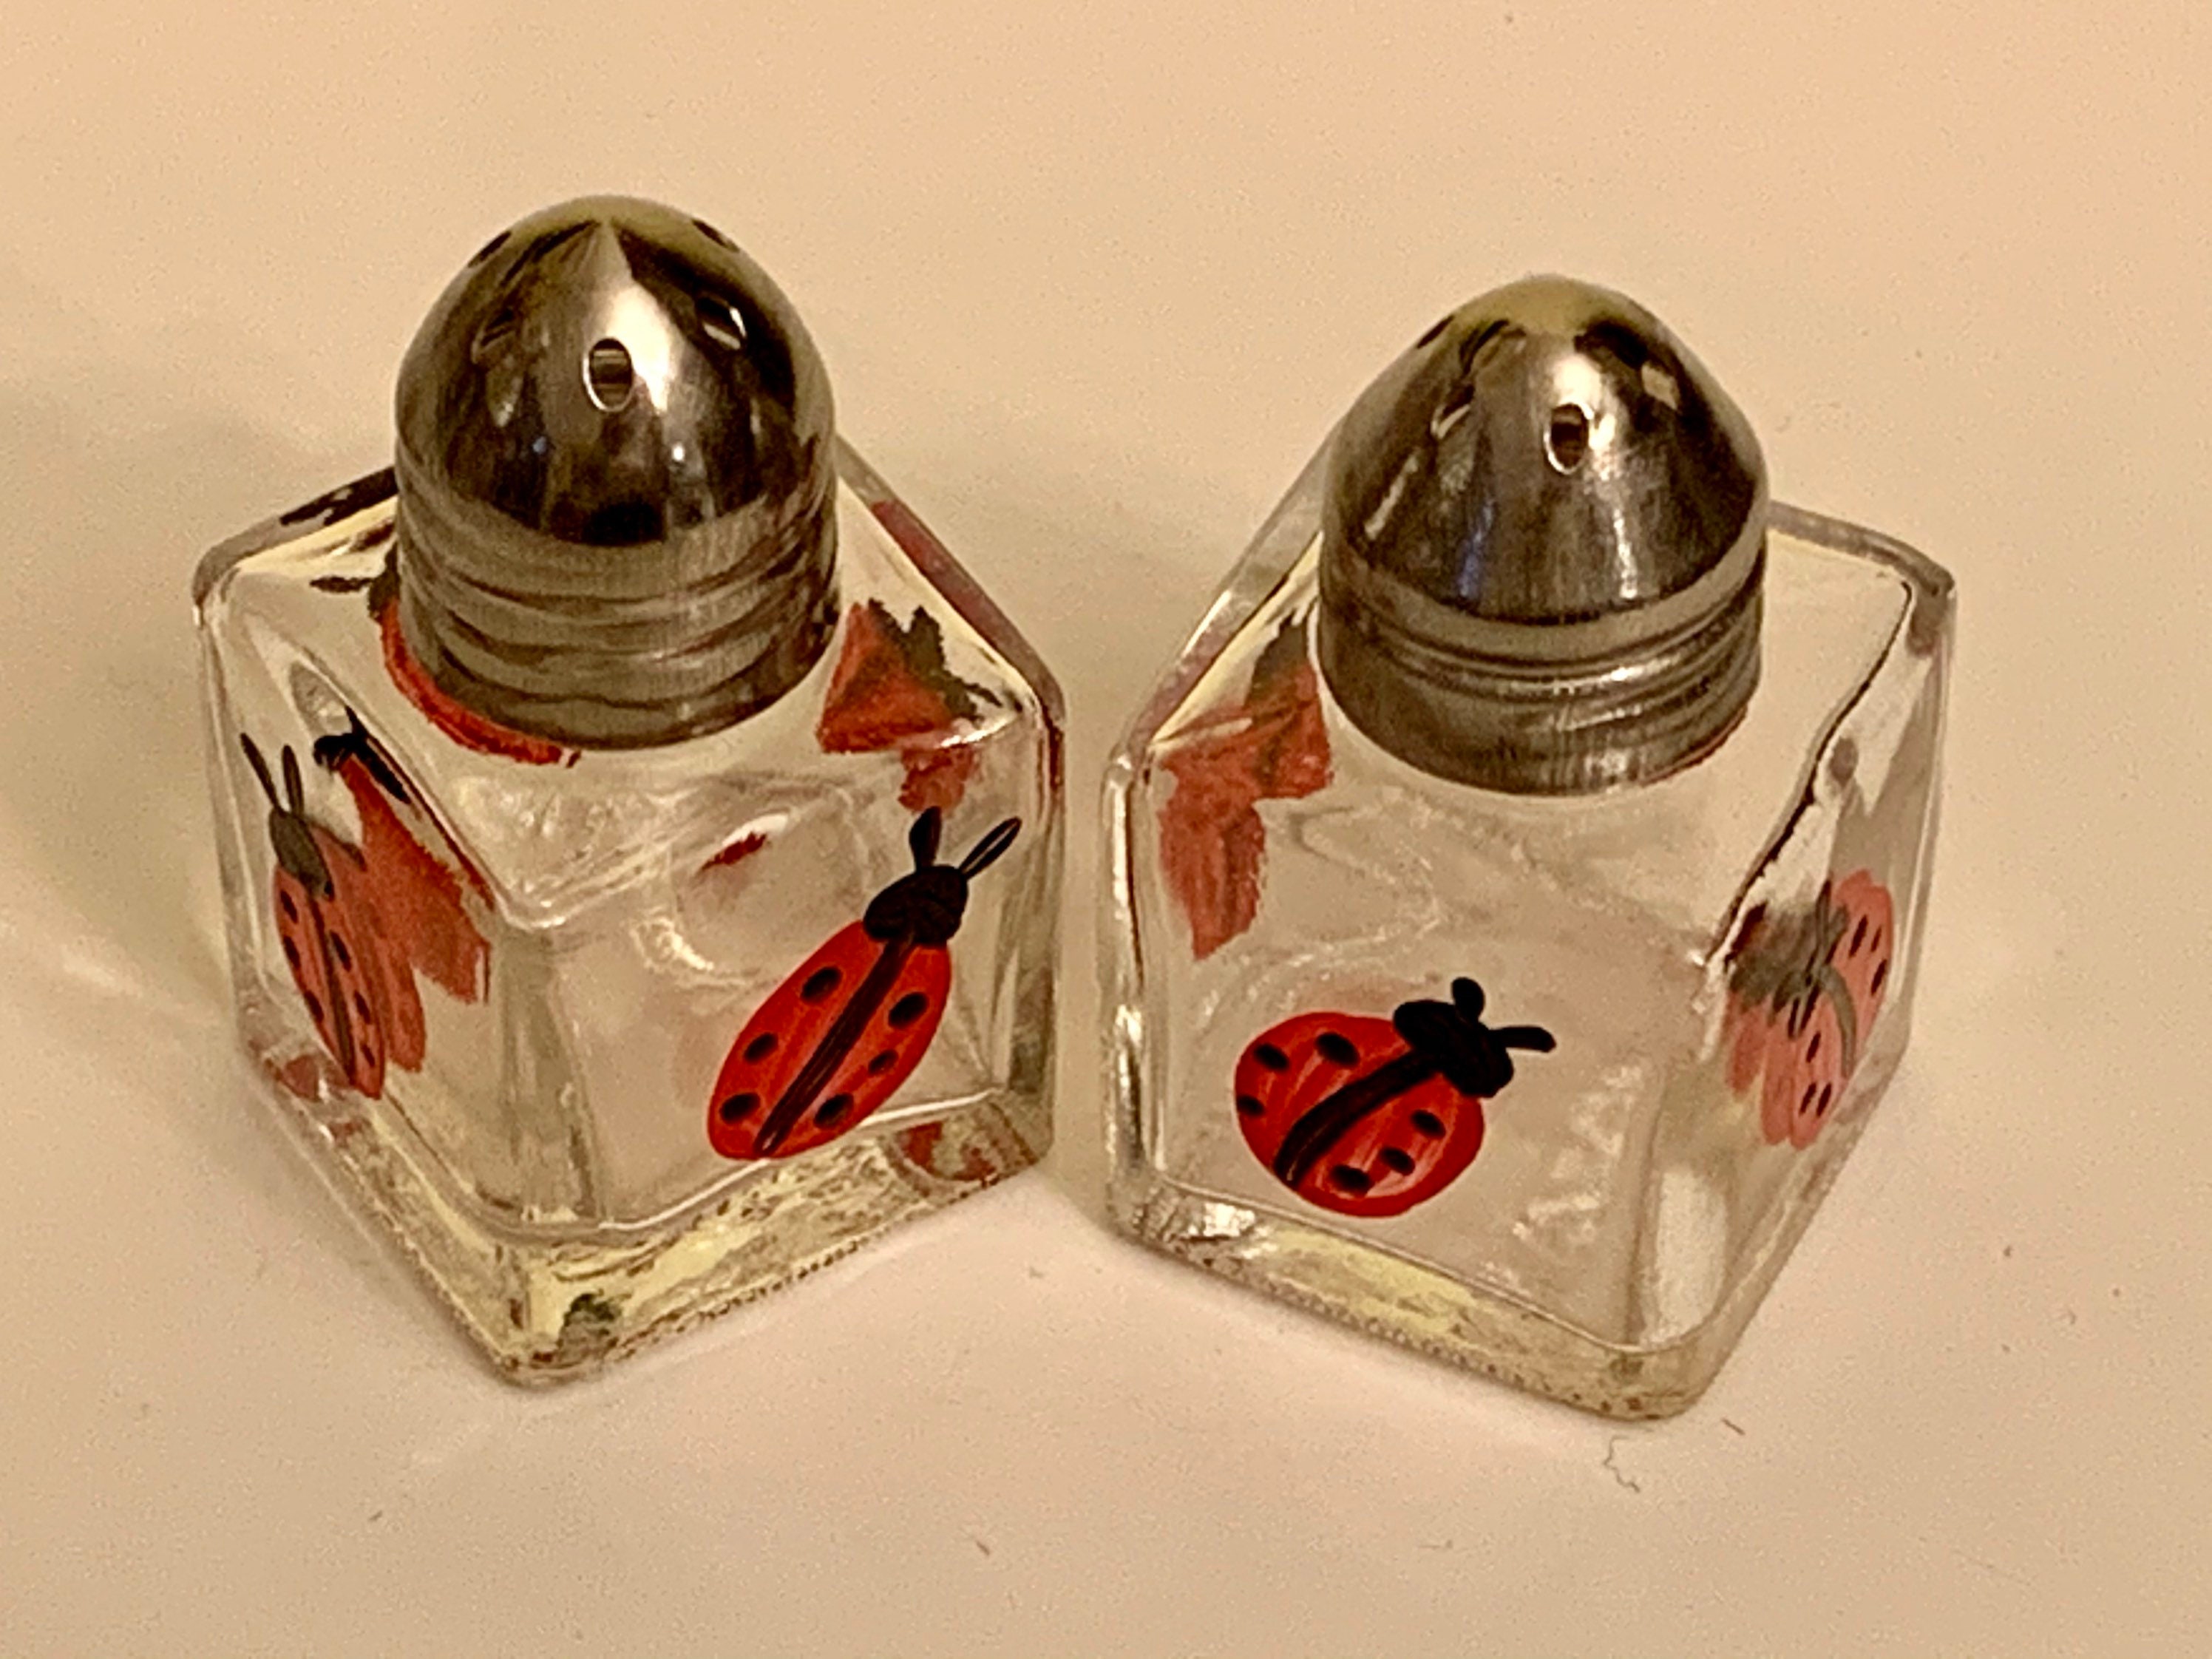 Mini Salt and Pepper Shakers Hand Painted With Cute Ladybugs Sure to Bring  You Joy. Makes Great Gift Idea for Friends and Family. 